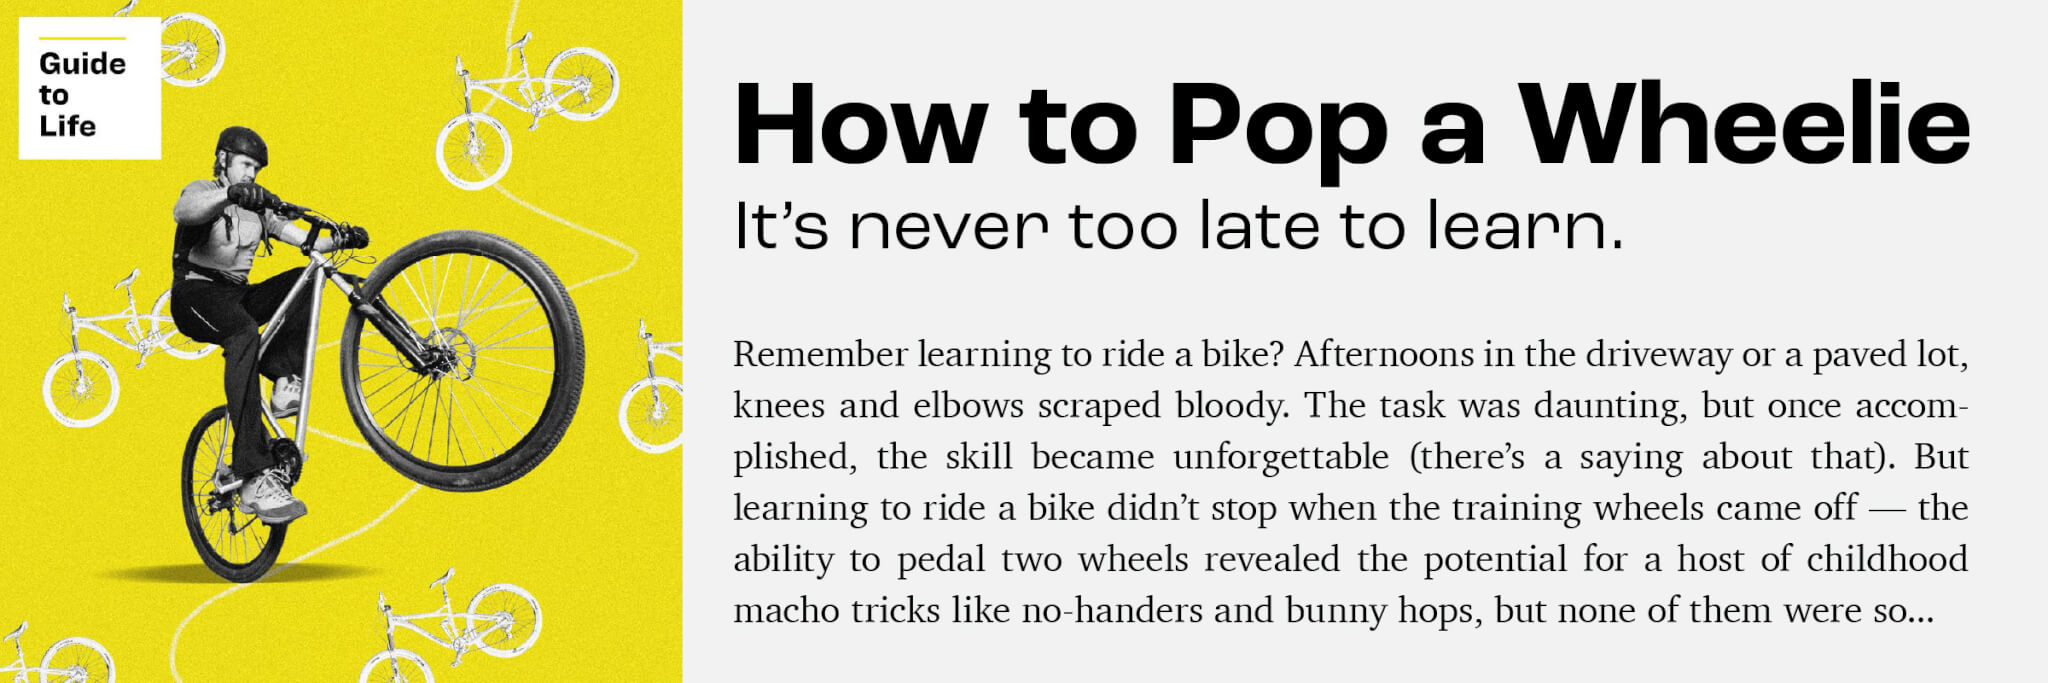 How to Pop a Wheelie. It's never too late to learn. Click to read more.